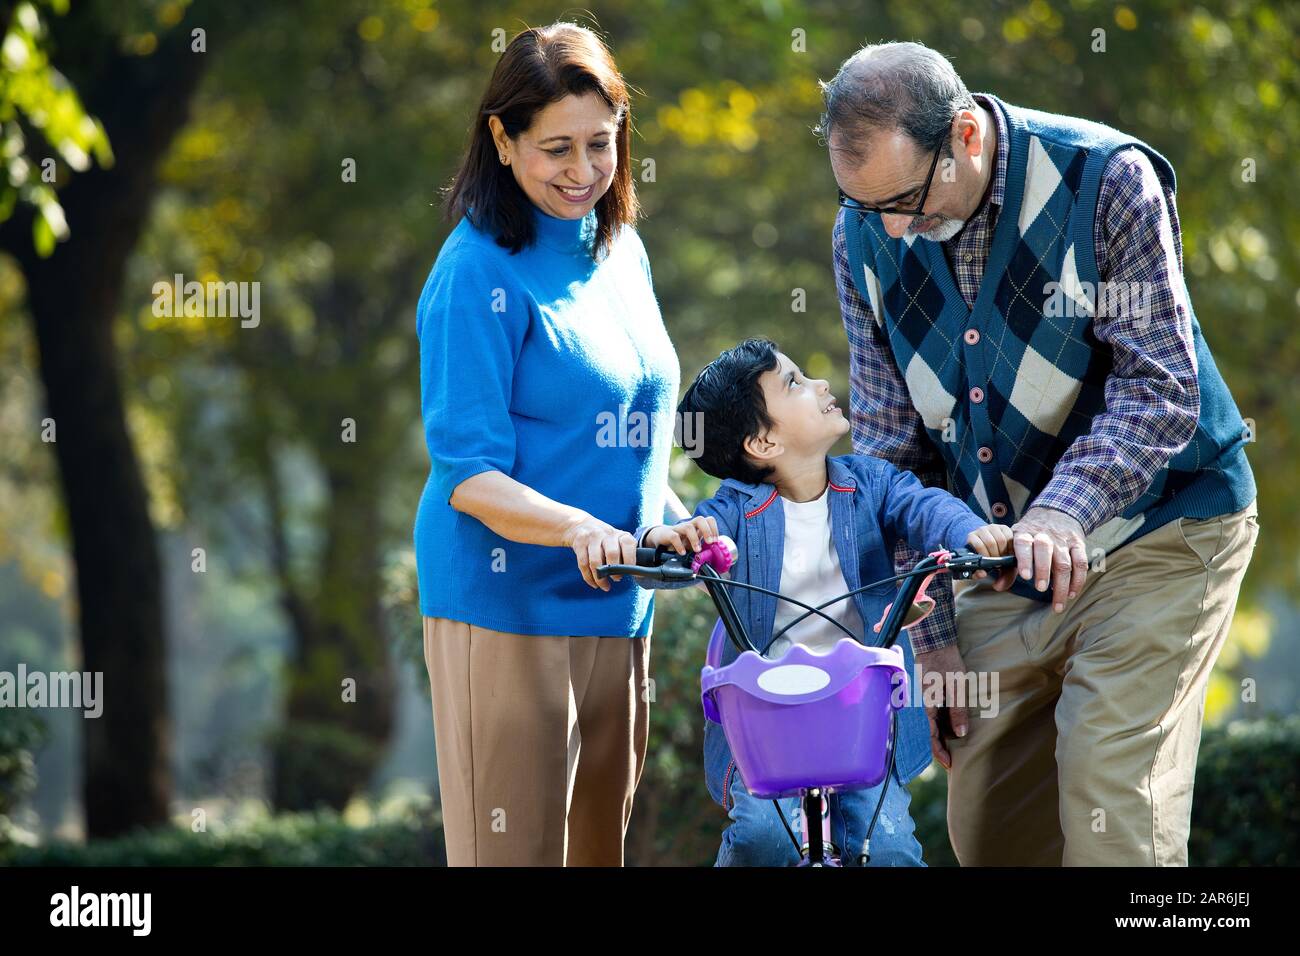 Grandparents with grandson learning to ride bicycle Stock Photo